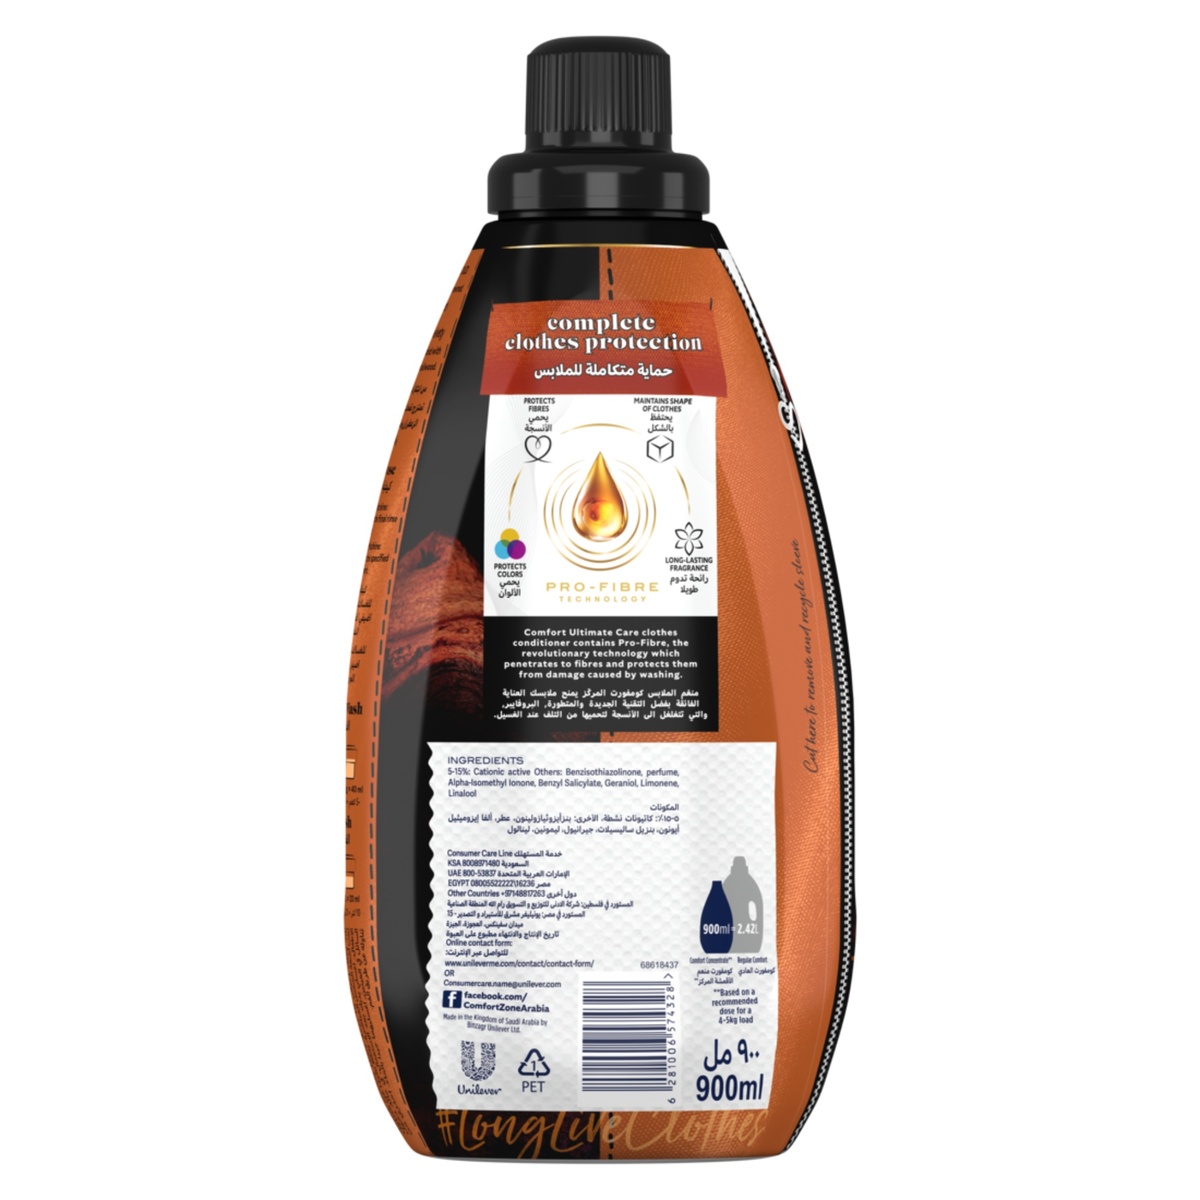 Comfort Ultimate Care Luxurious Oud Concentrated Fabric Softener 900ml